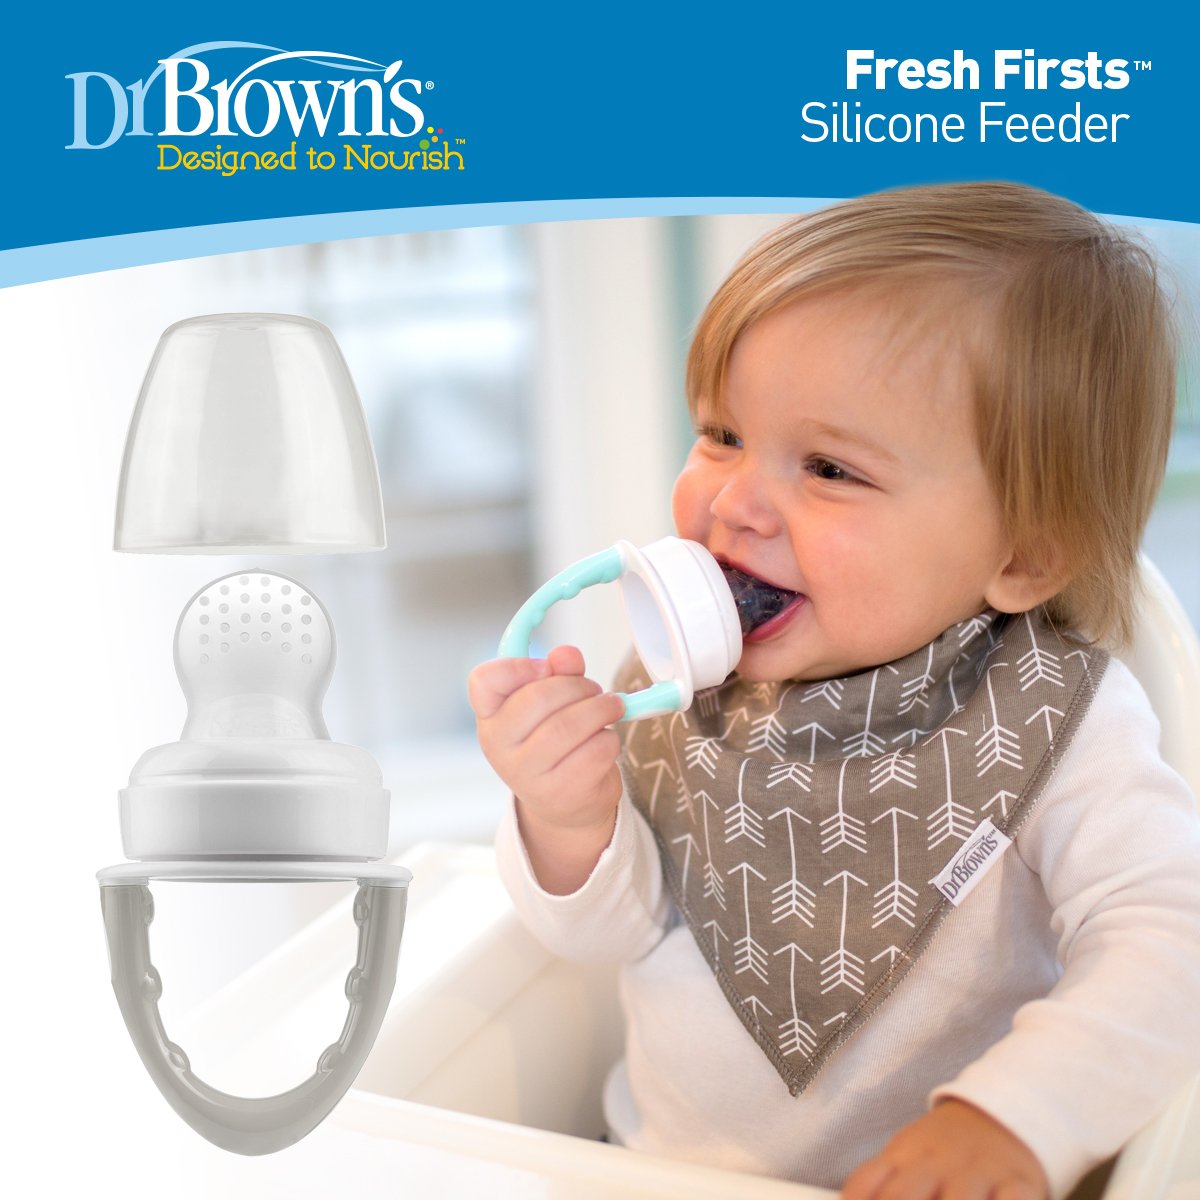 Dr Browns Fresh First Silicone Feeder